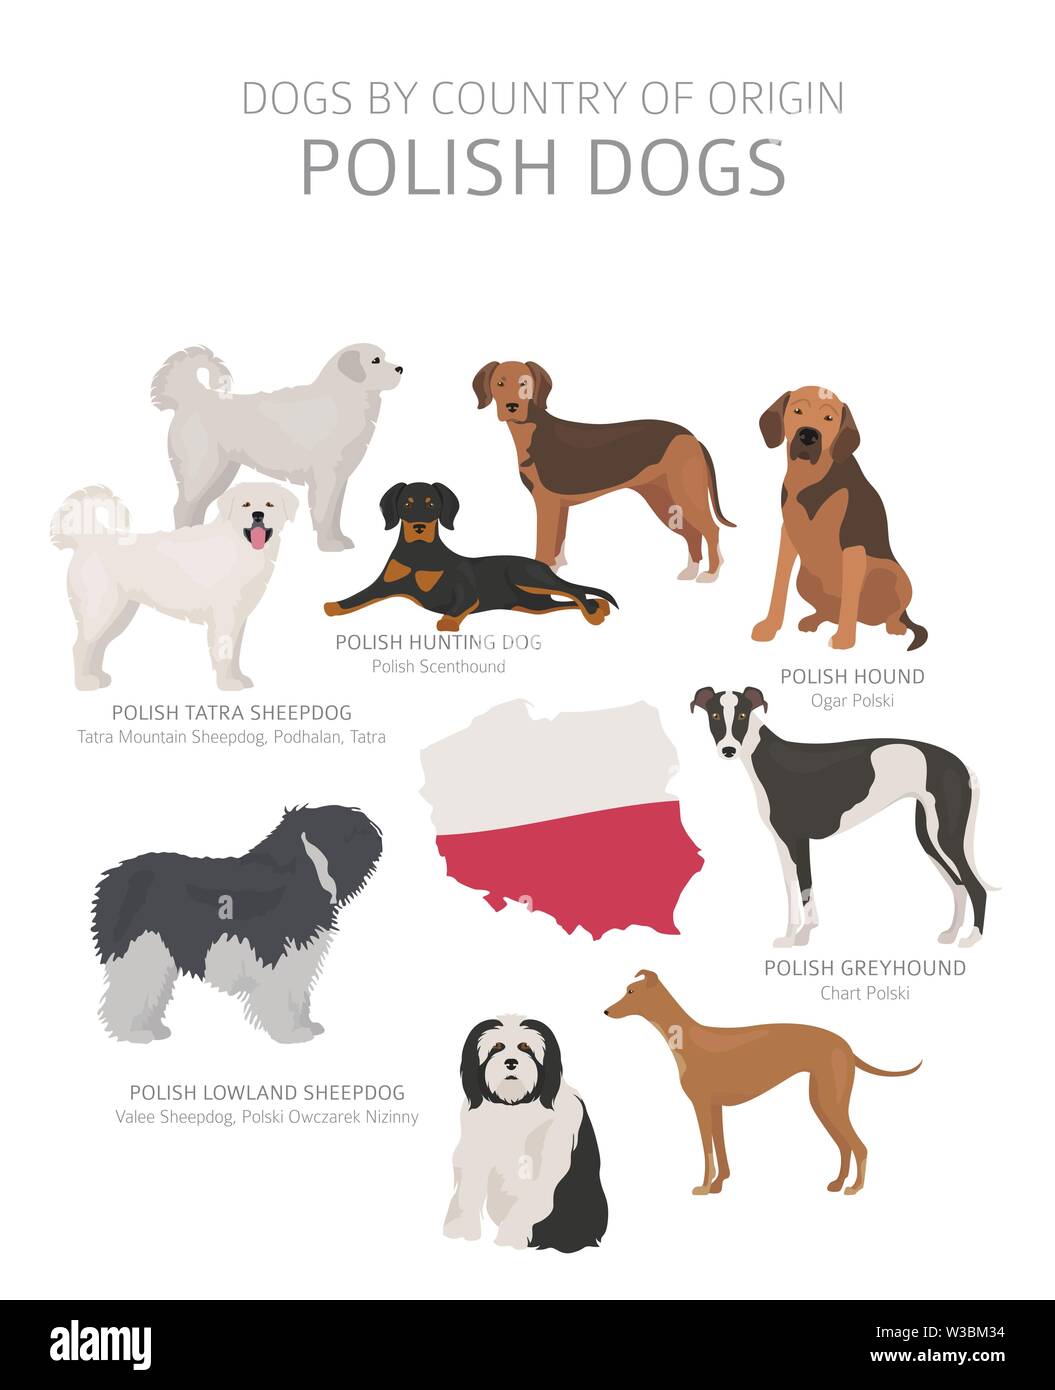 Dogs by country of origin. Polish dog breeds. Shepherds, hunting, herding, toy, working and service dogs  set.  Vector illustration Stock Vector